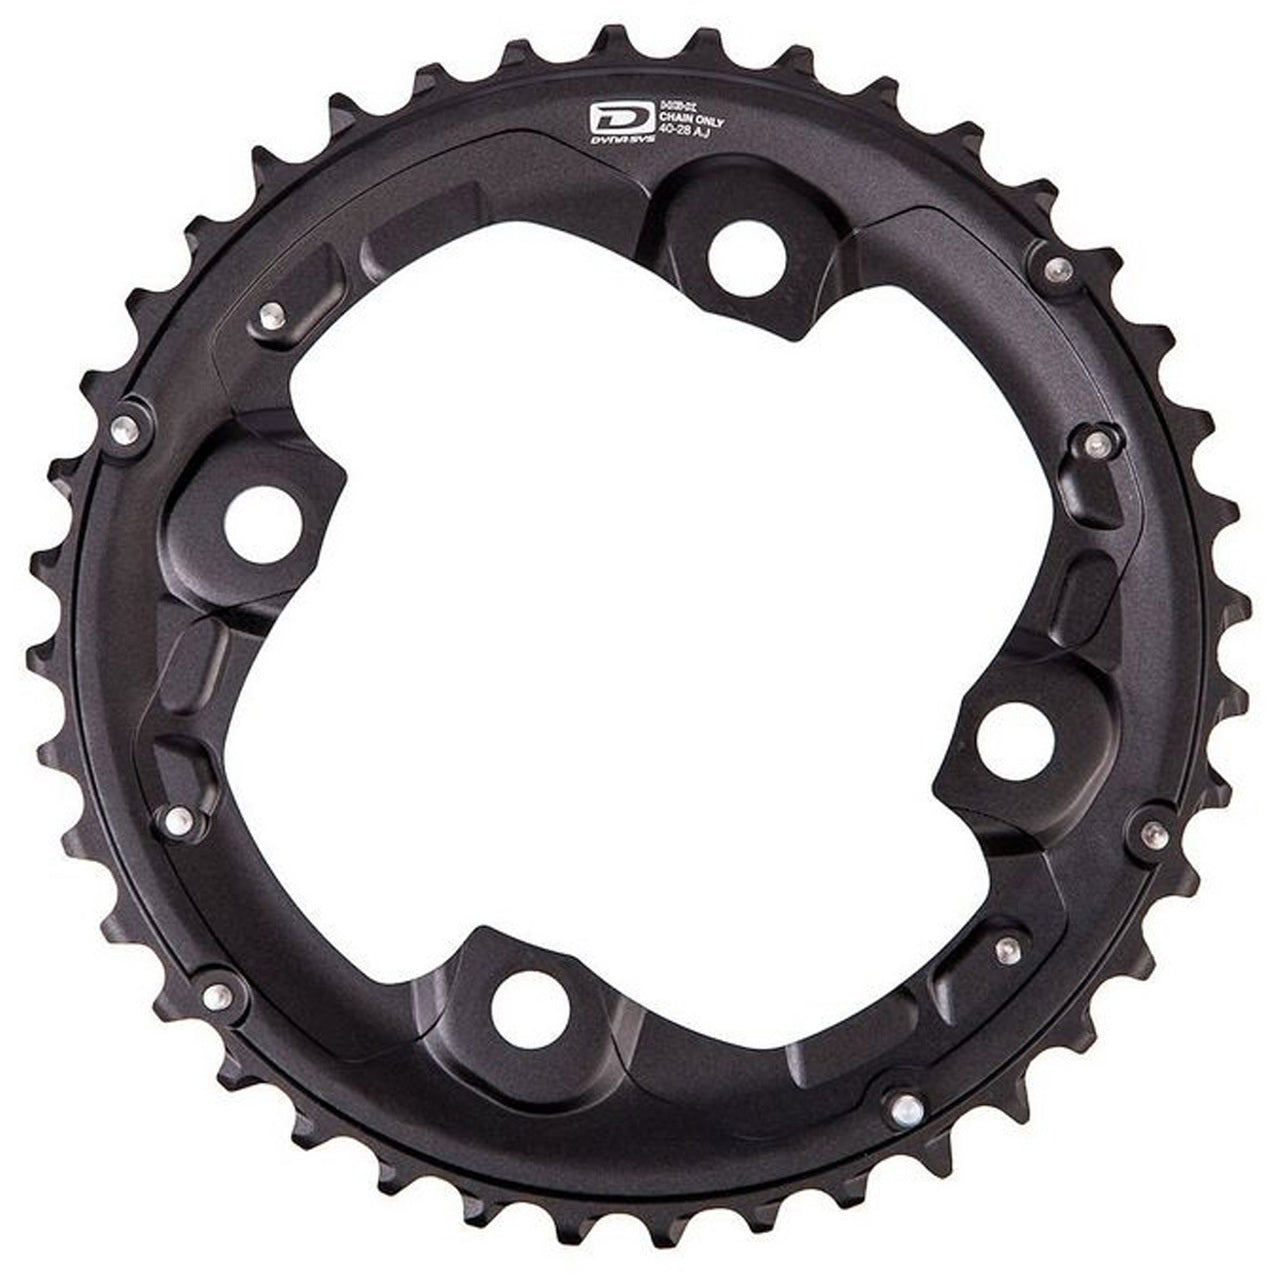 NEW Shimano M612 Deore Chainring 40t 96bcd for 10-Speed Triple